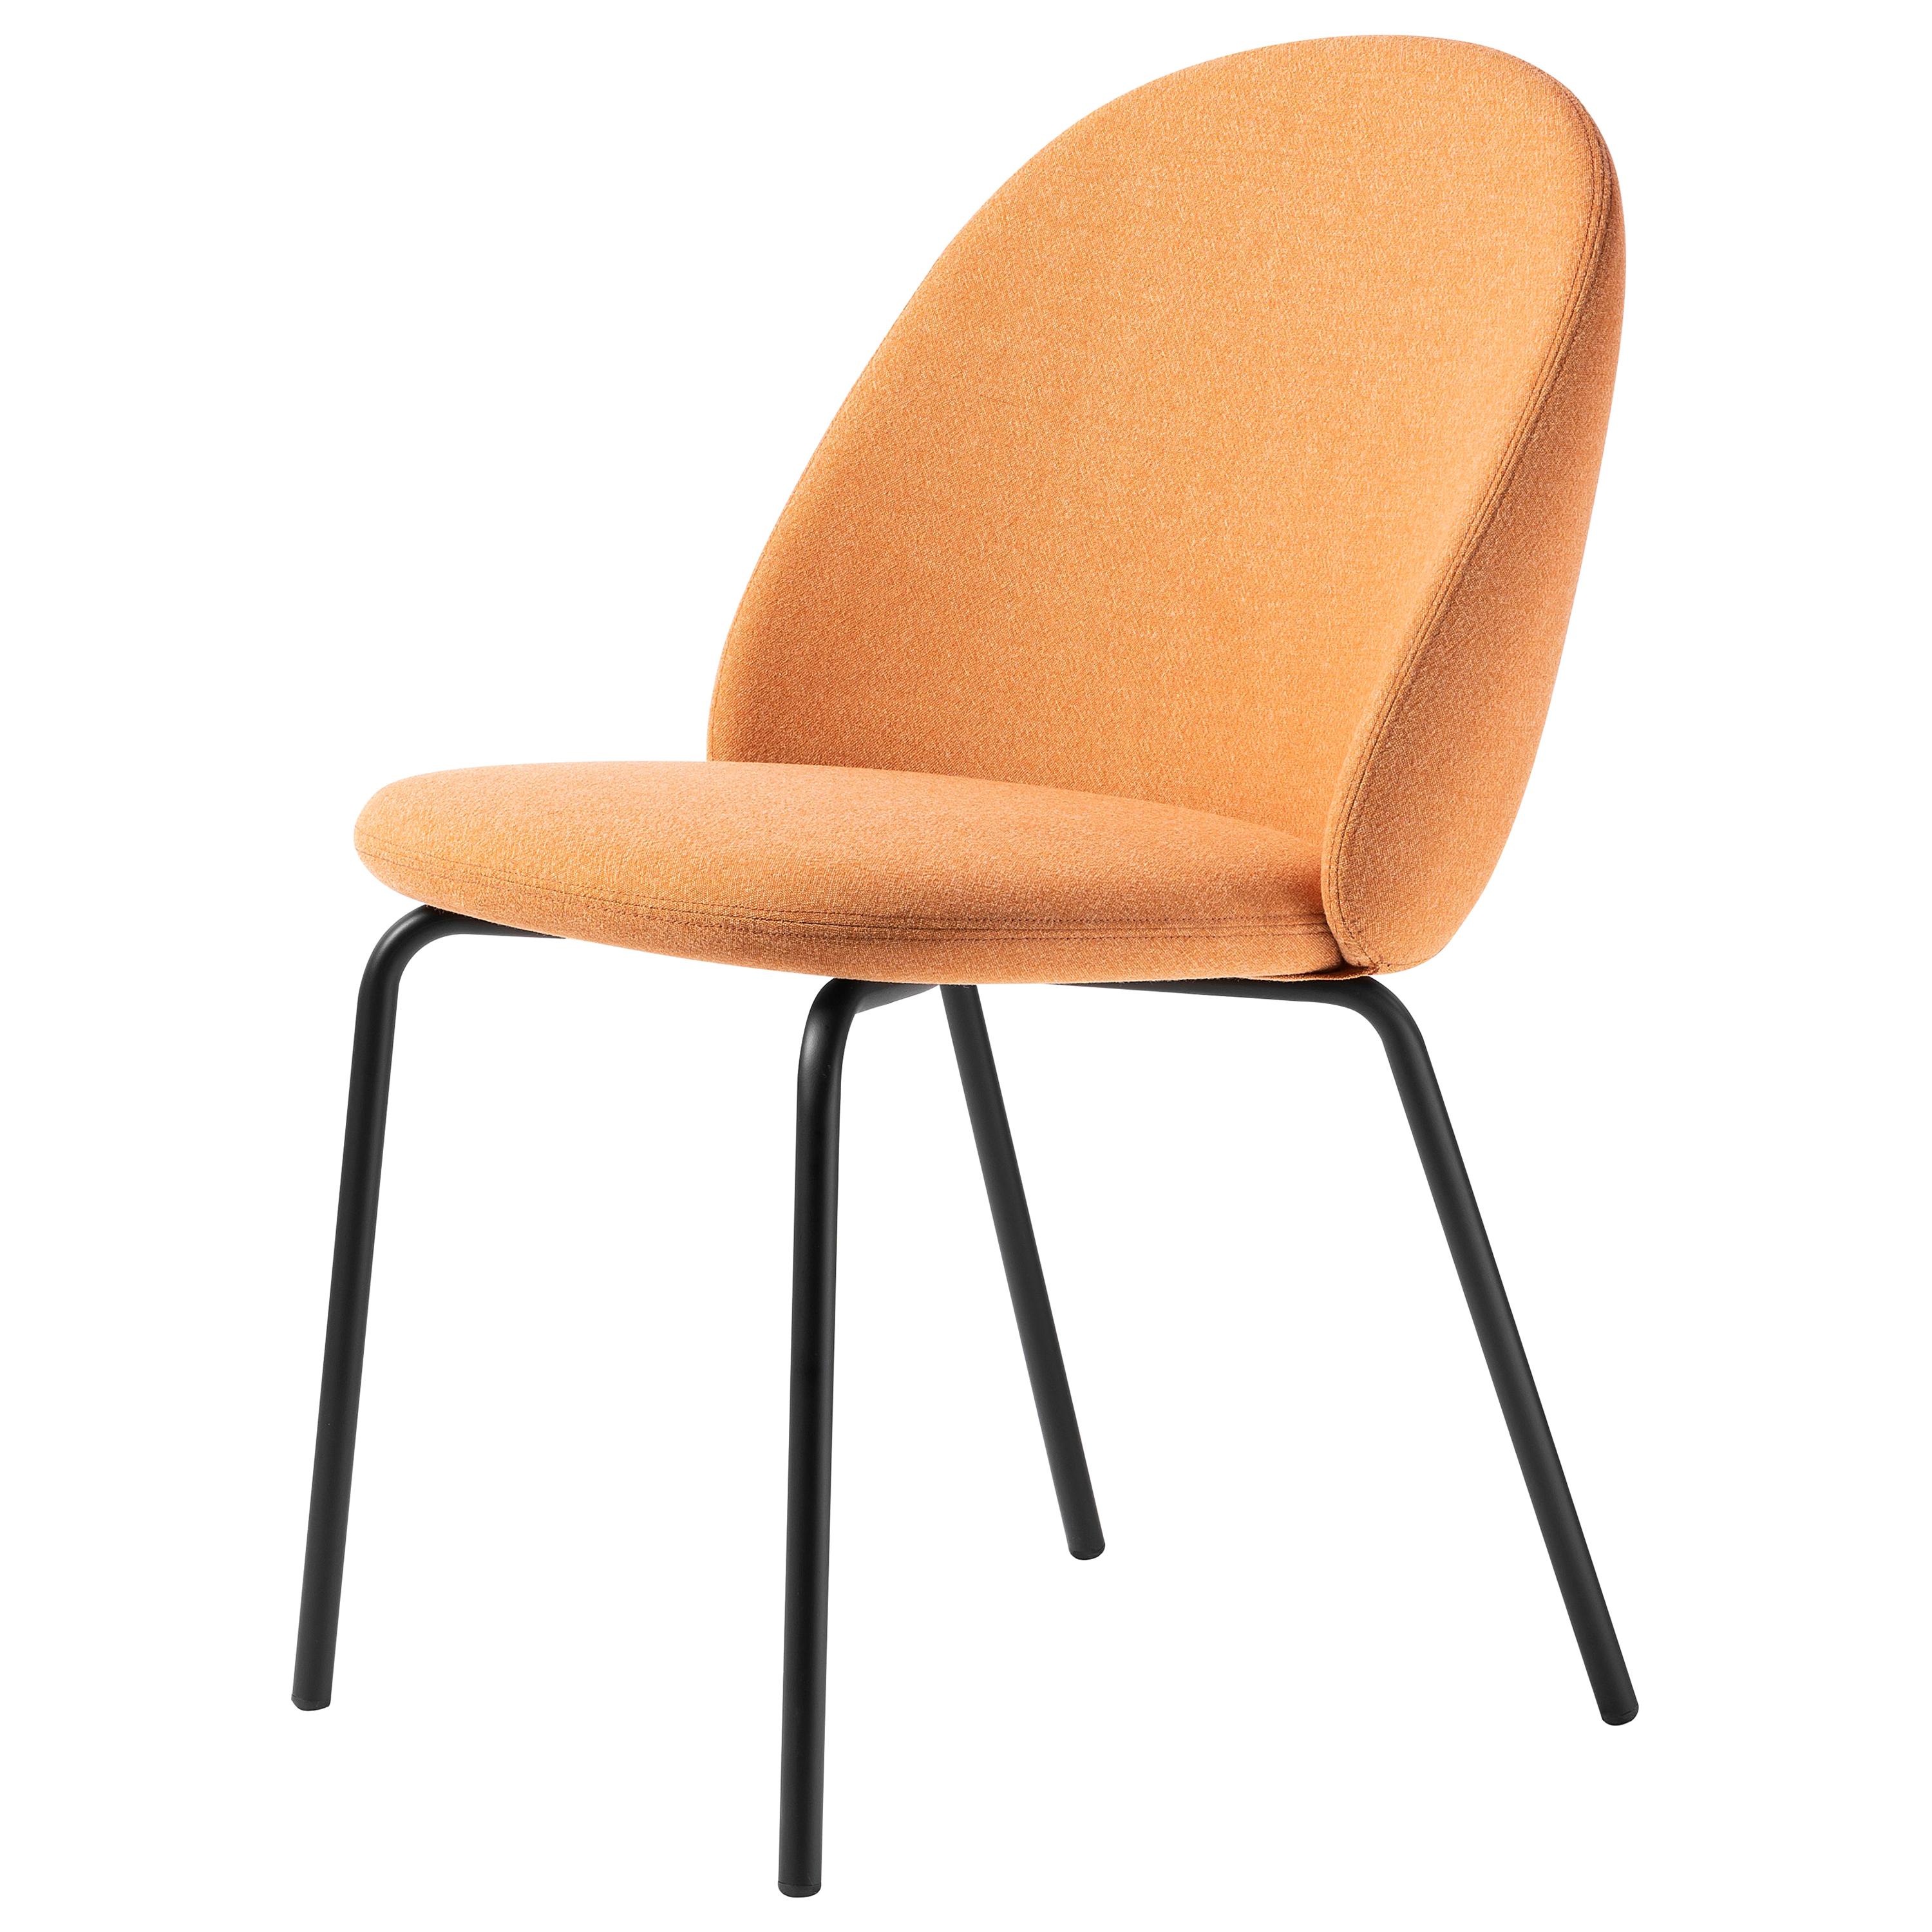 Iola Upholstered Chair in Black Metal Base, by E-ggs